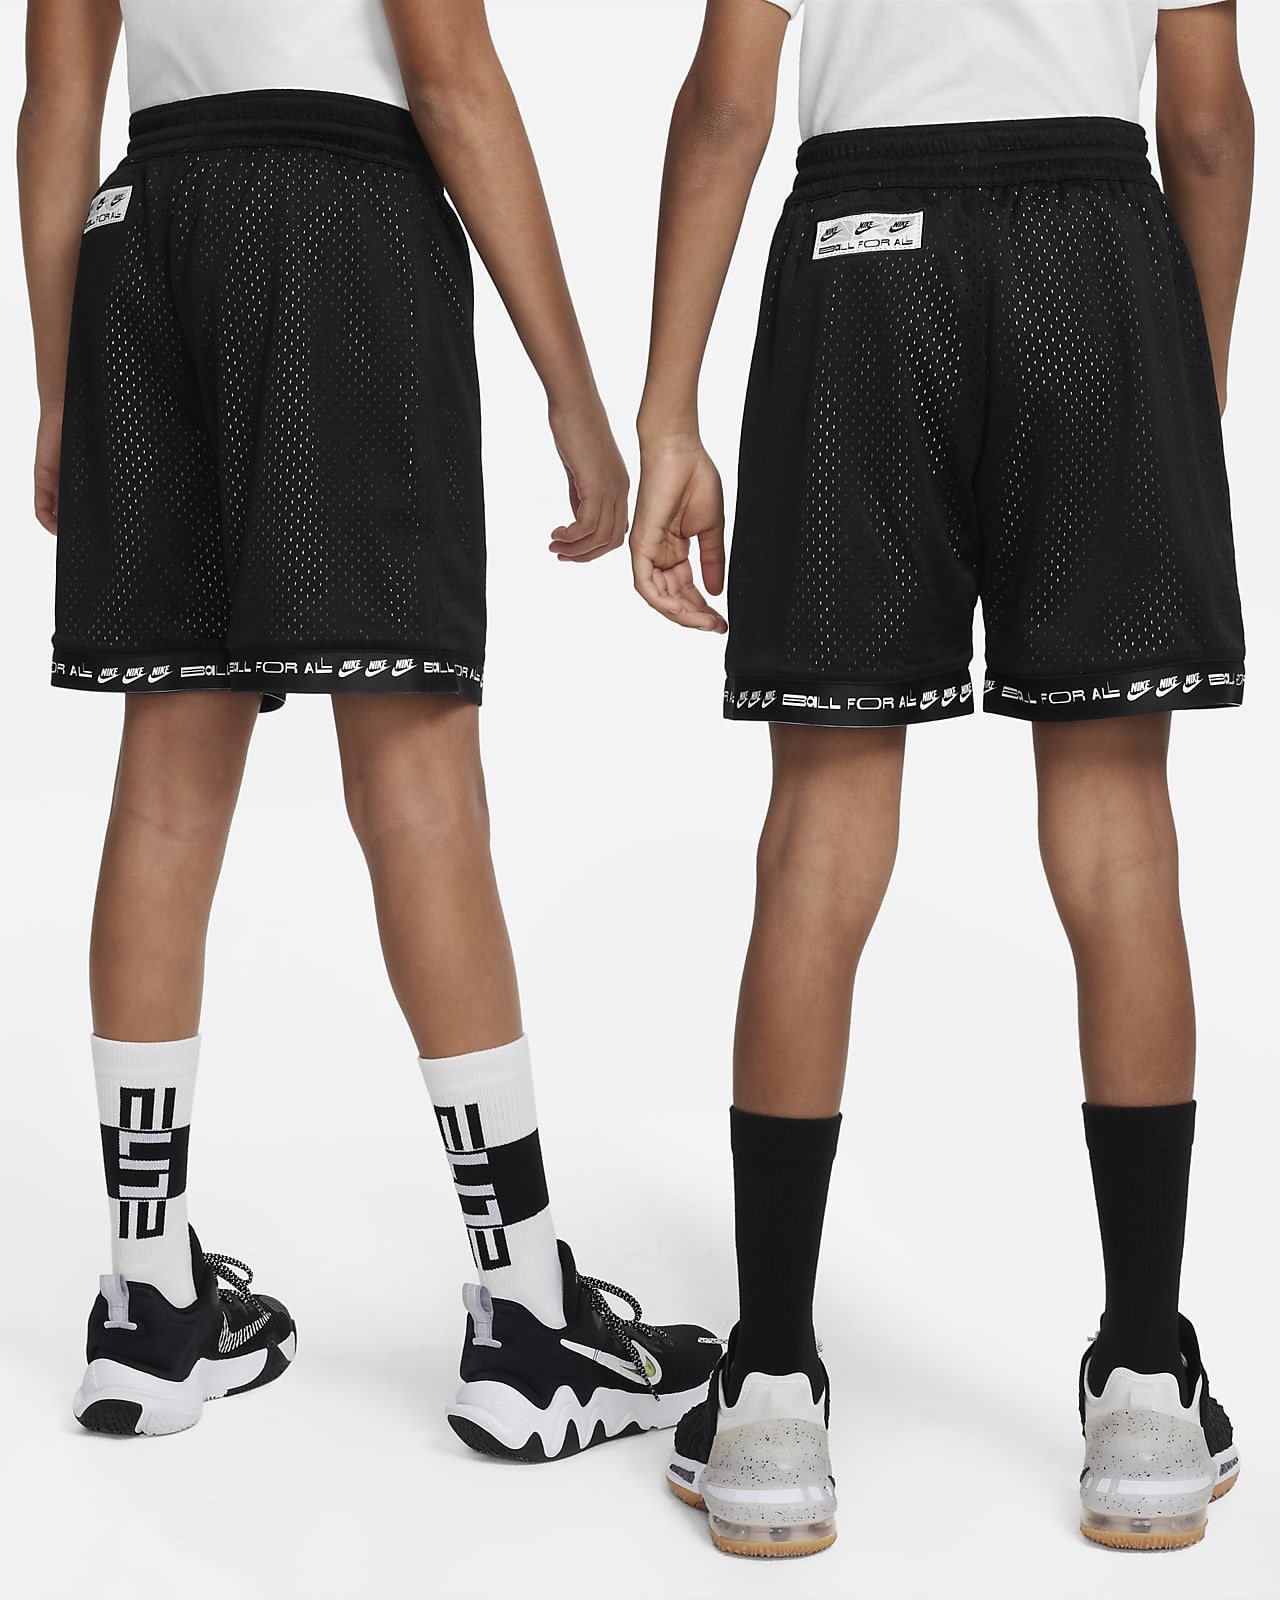 Black and White Printed Mesh Basketball Inspired Graphic 